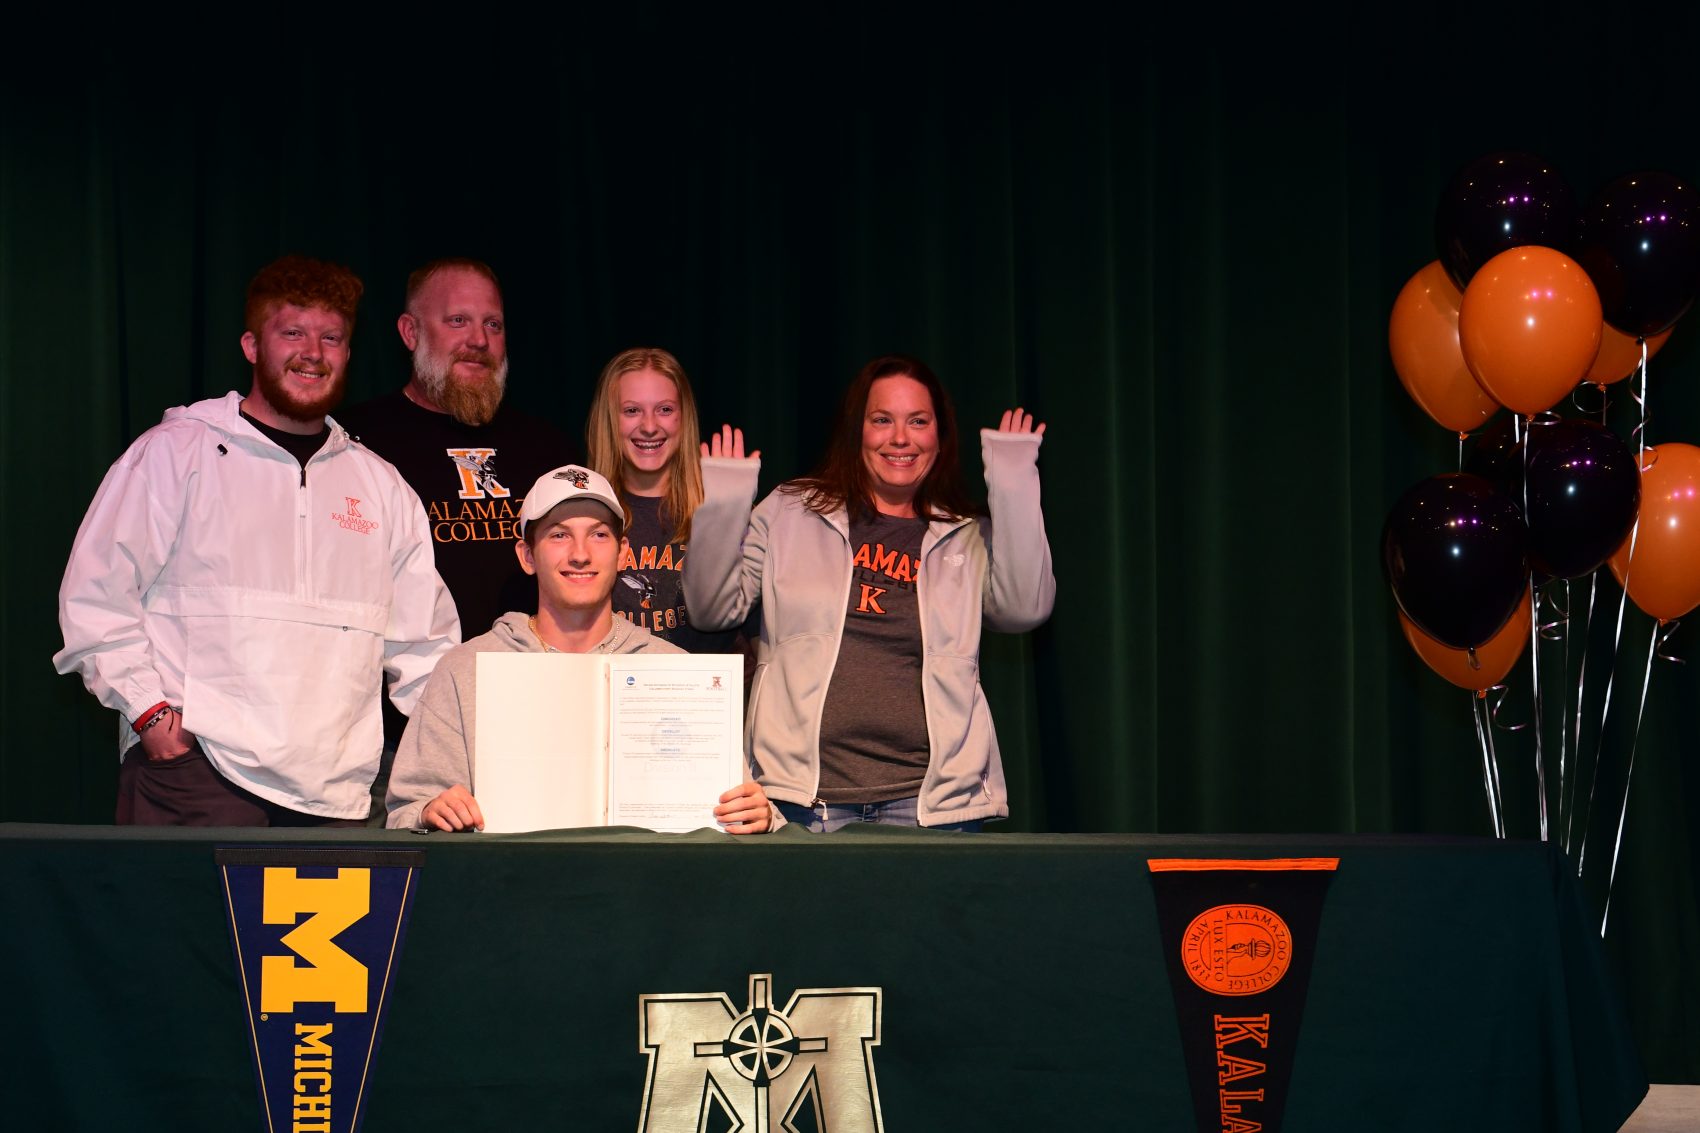 Muskegon Catholic’s Chase Willer taking his football talents to Kalamazoo College